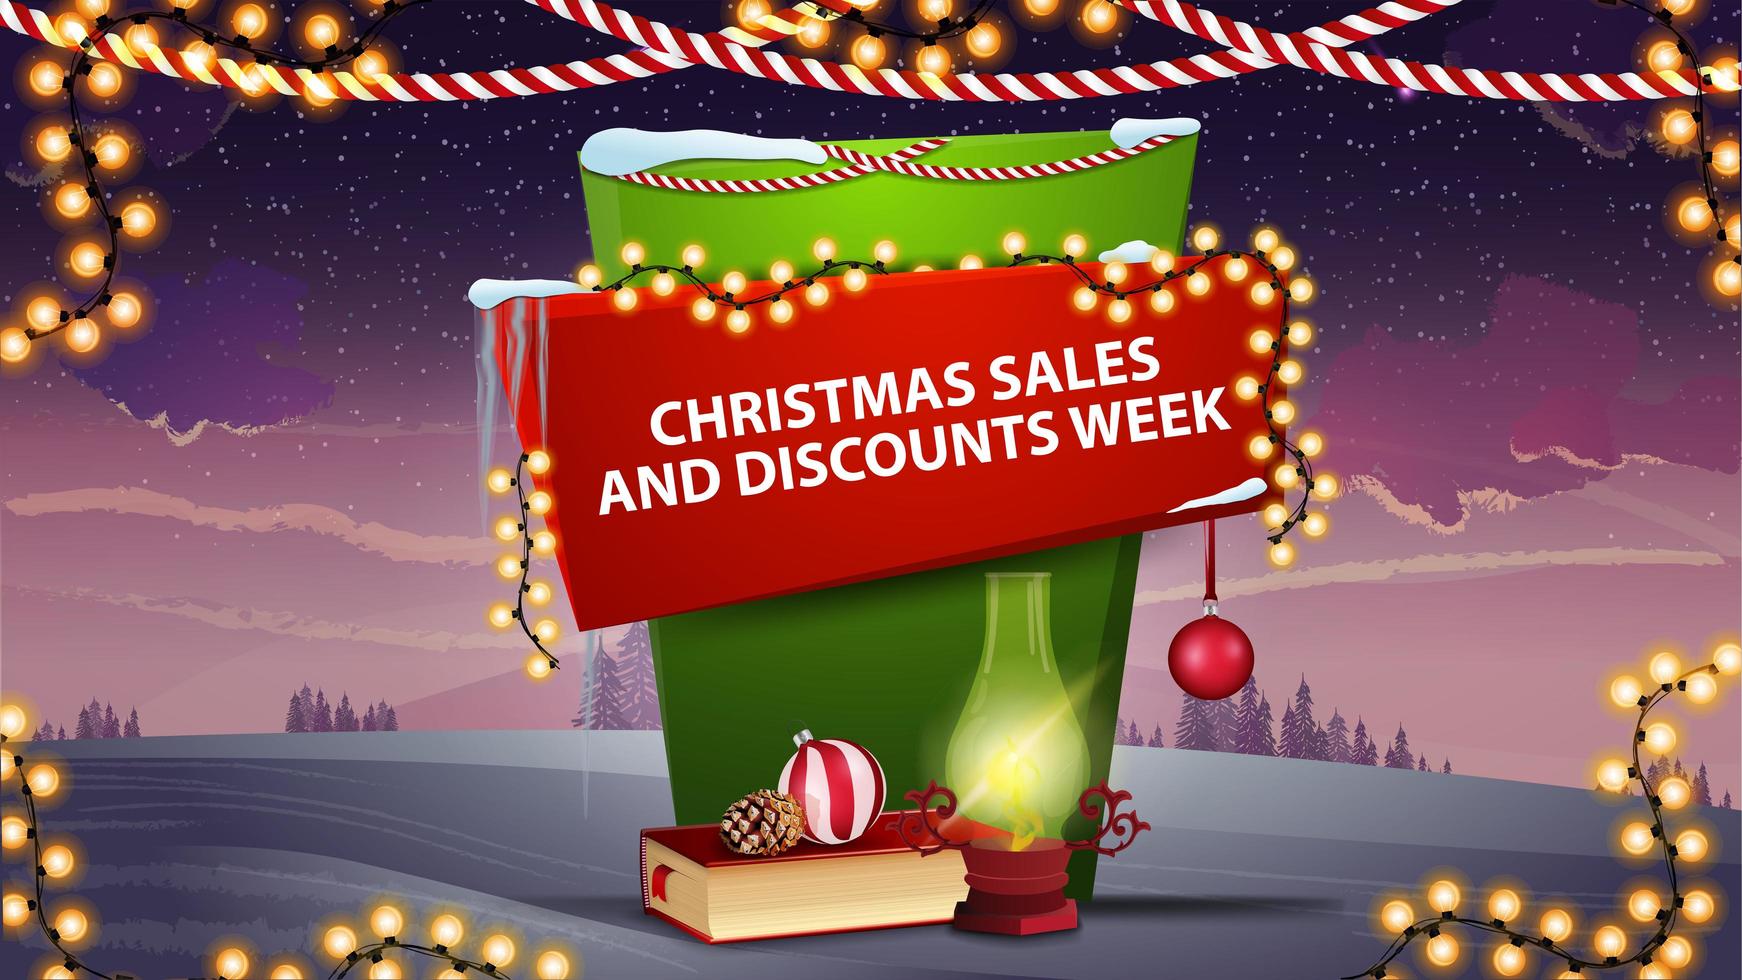 Christmas sales and discount week, vertical banner for your creativity in cartoon style with antique lamp, Christmas book, Christmas ball and cone. Discount banner with beautiful winter landscape on the background vector